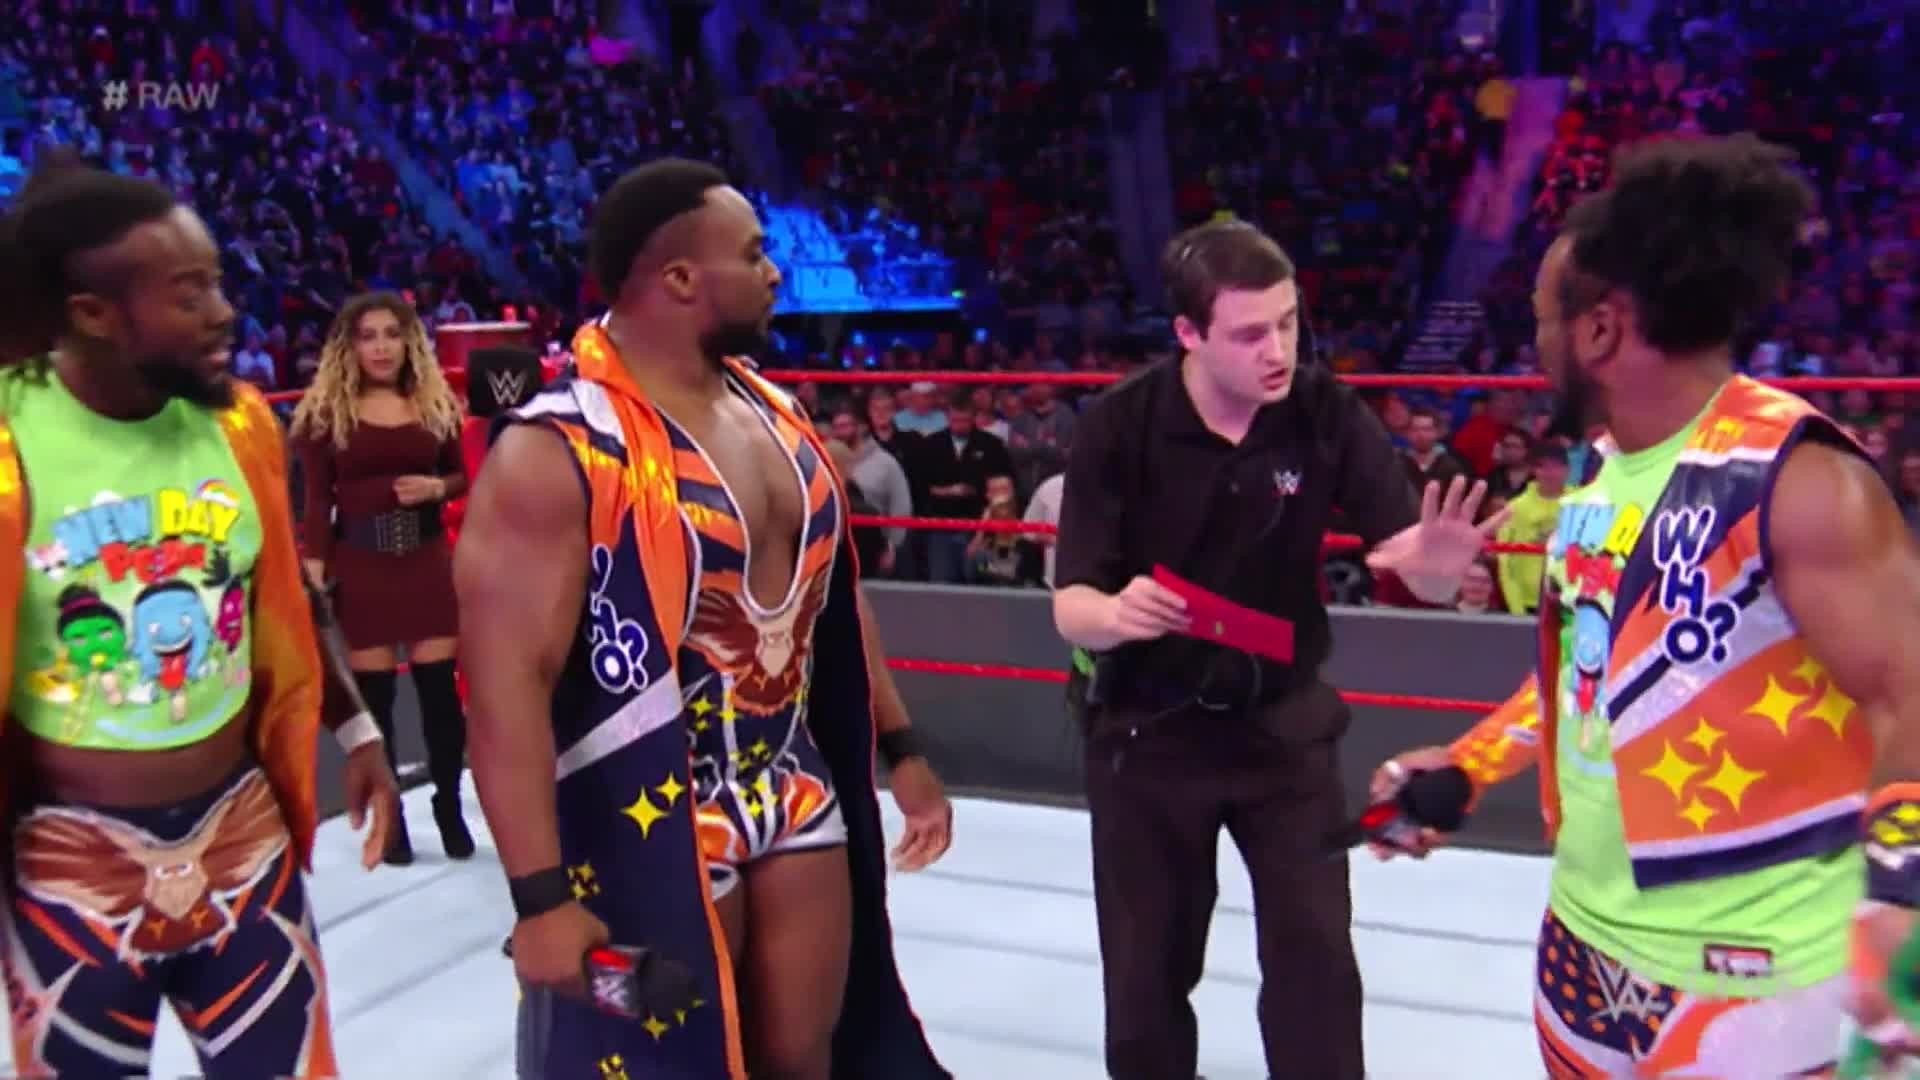 1920x1080 The Shining Stars were wrongly announced as The New Day's opponents on Raw  in scenes similar